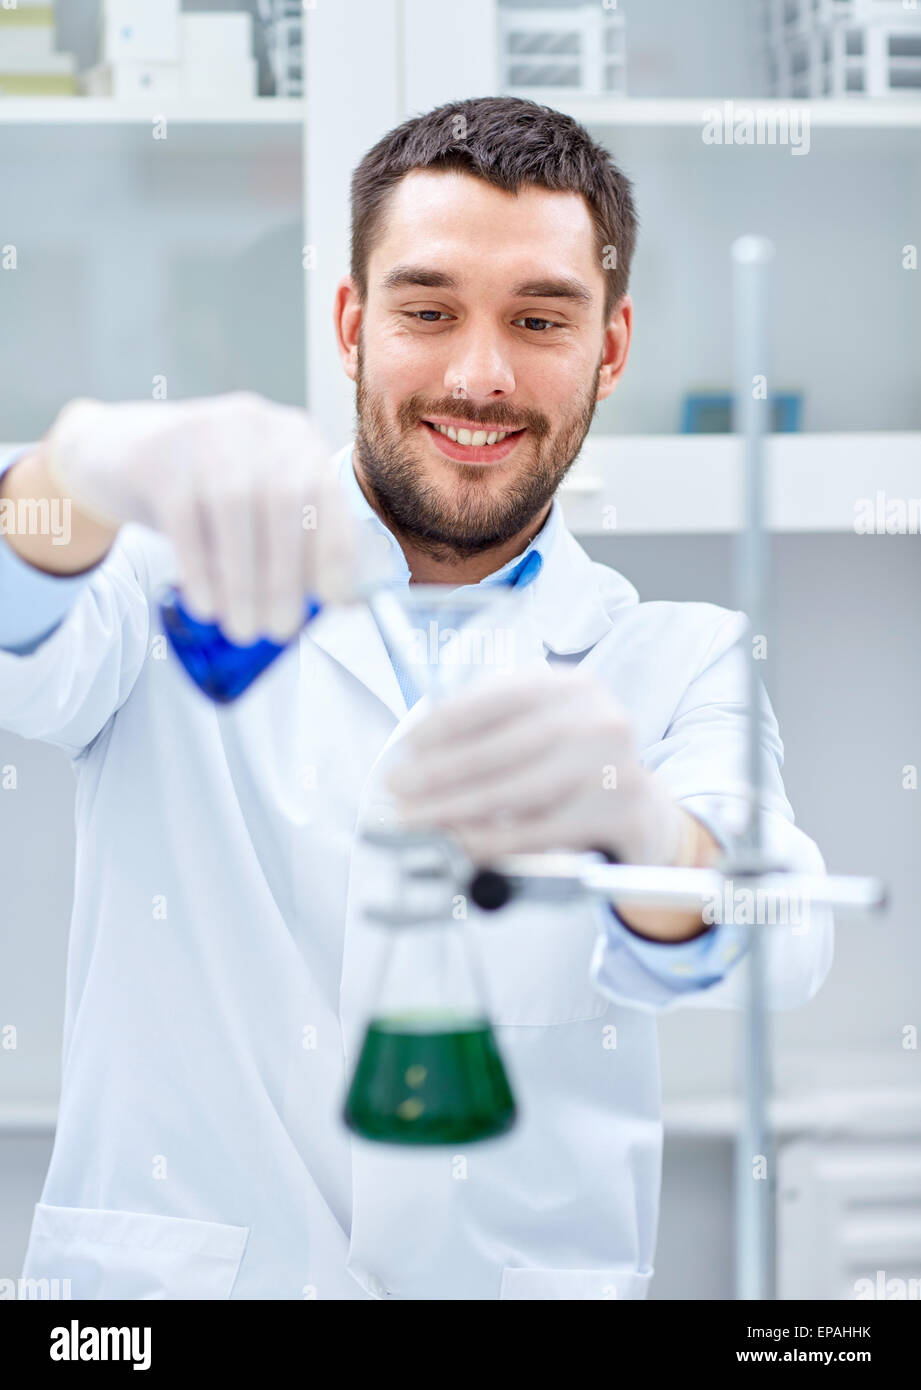 young scientist making test or research in lab Stock Photo